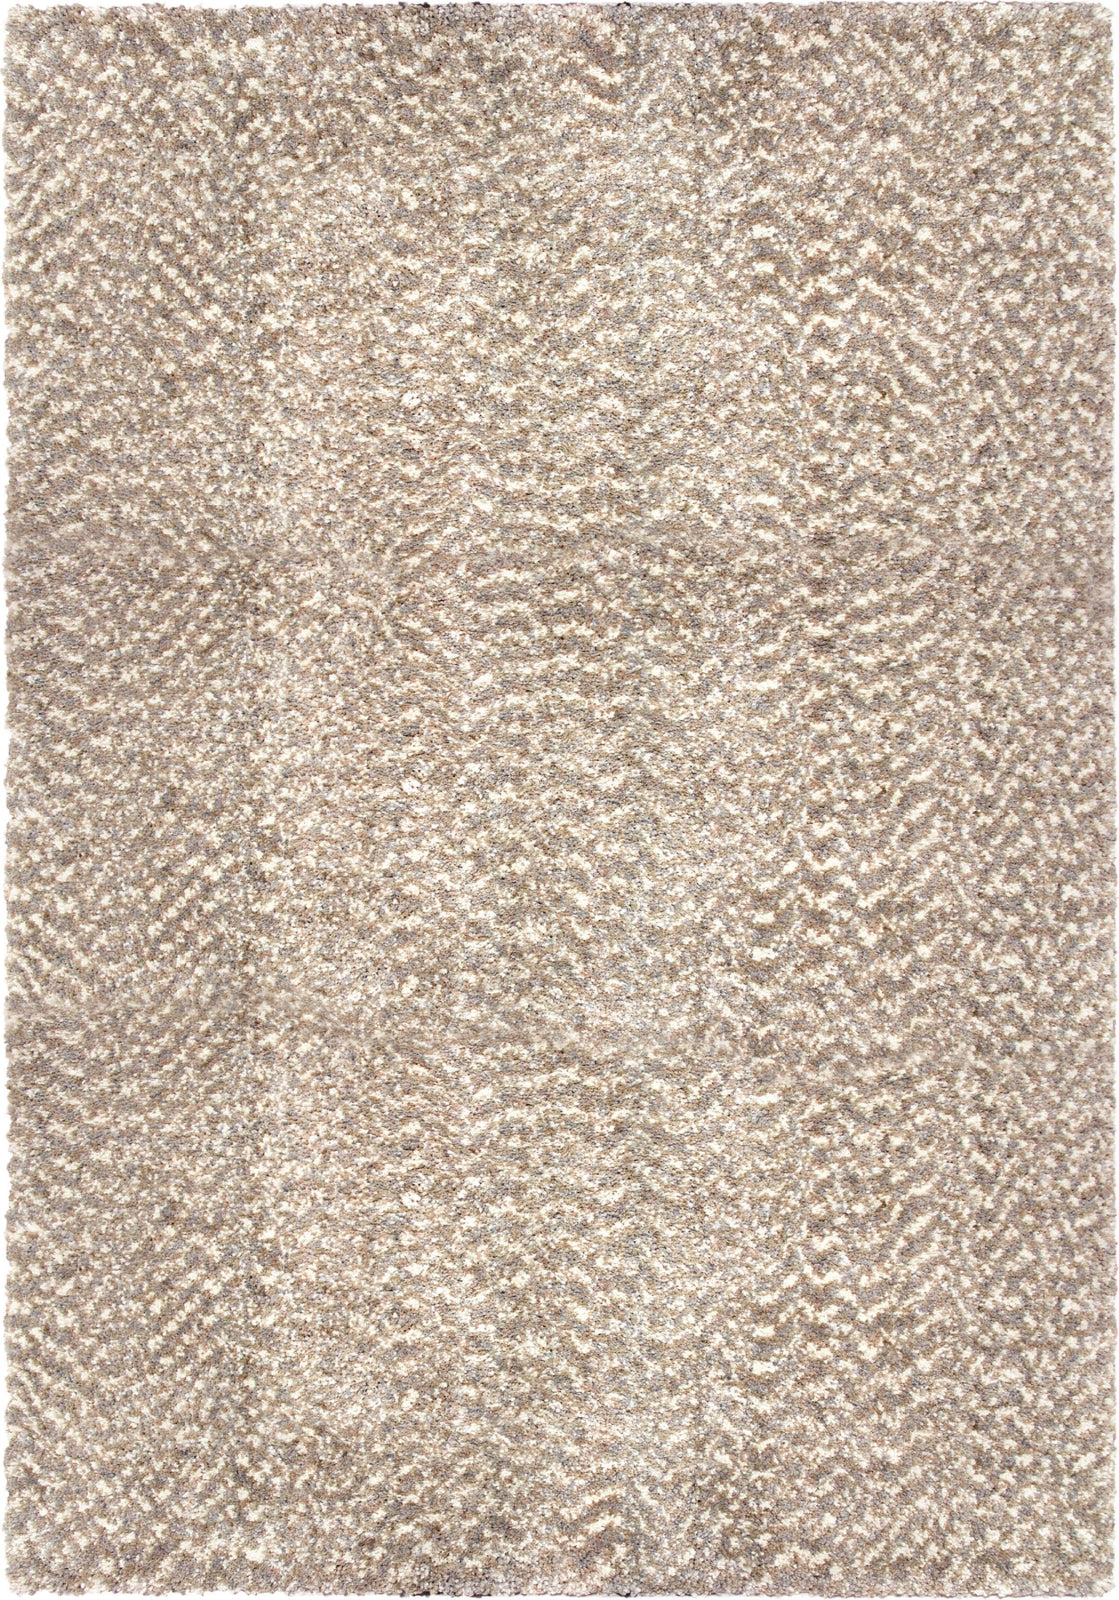 Orian Rugs Cotton Tail Solid Beige Area Rug by Palmetto Living main image